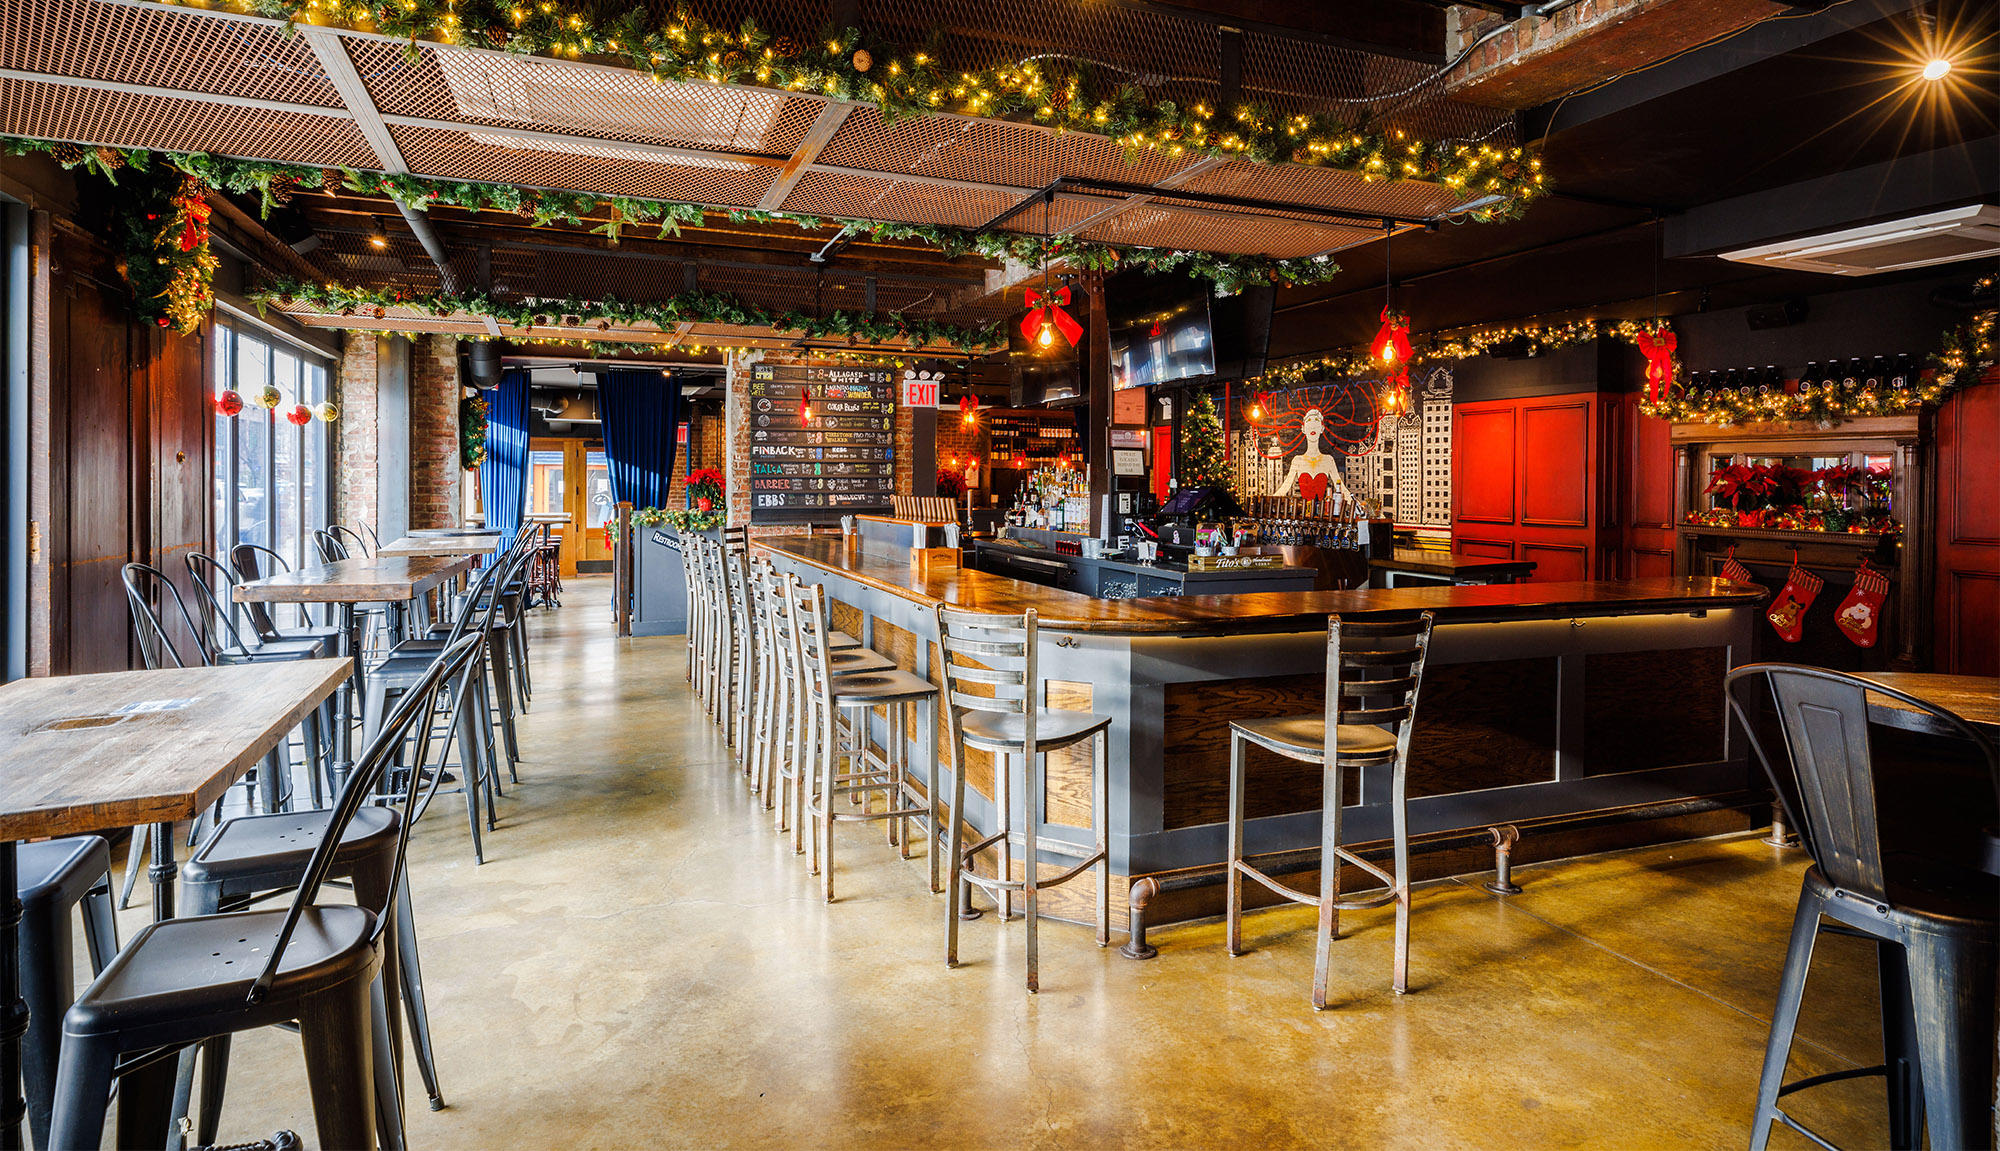 Rivercrest's main bar is dressed up in festive decor for the holiday season located in the heart of Queens, Astoria